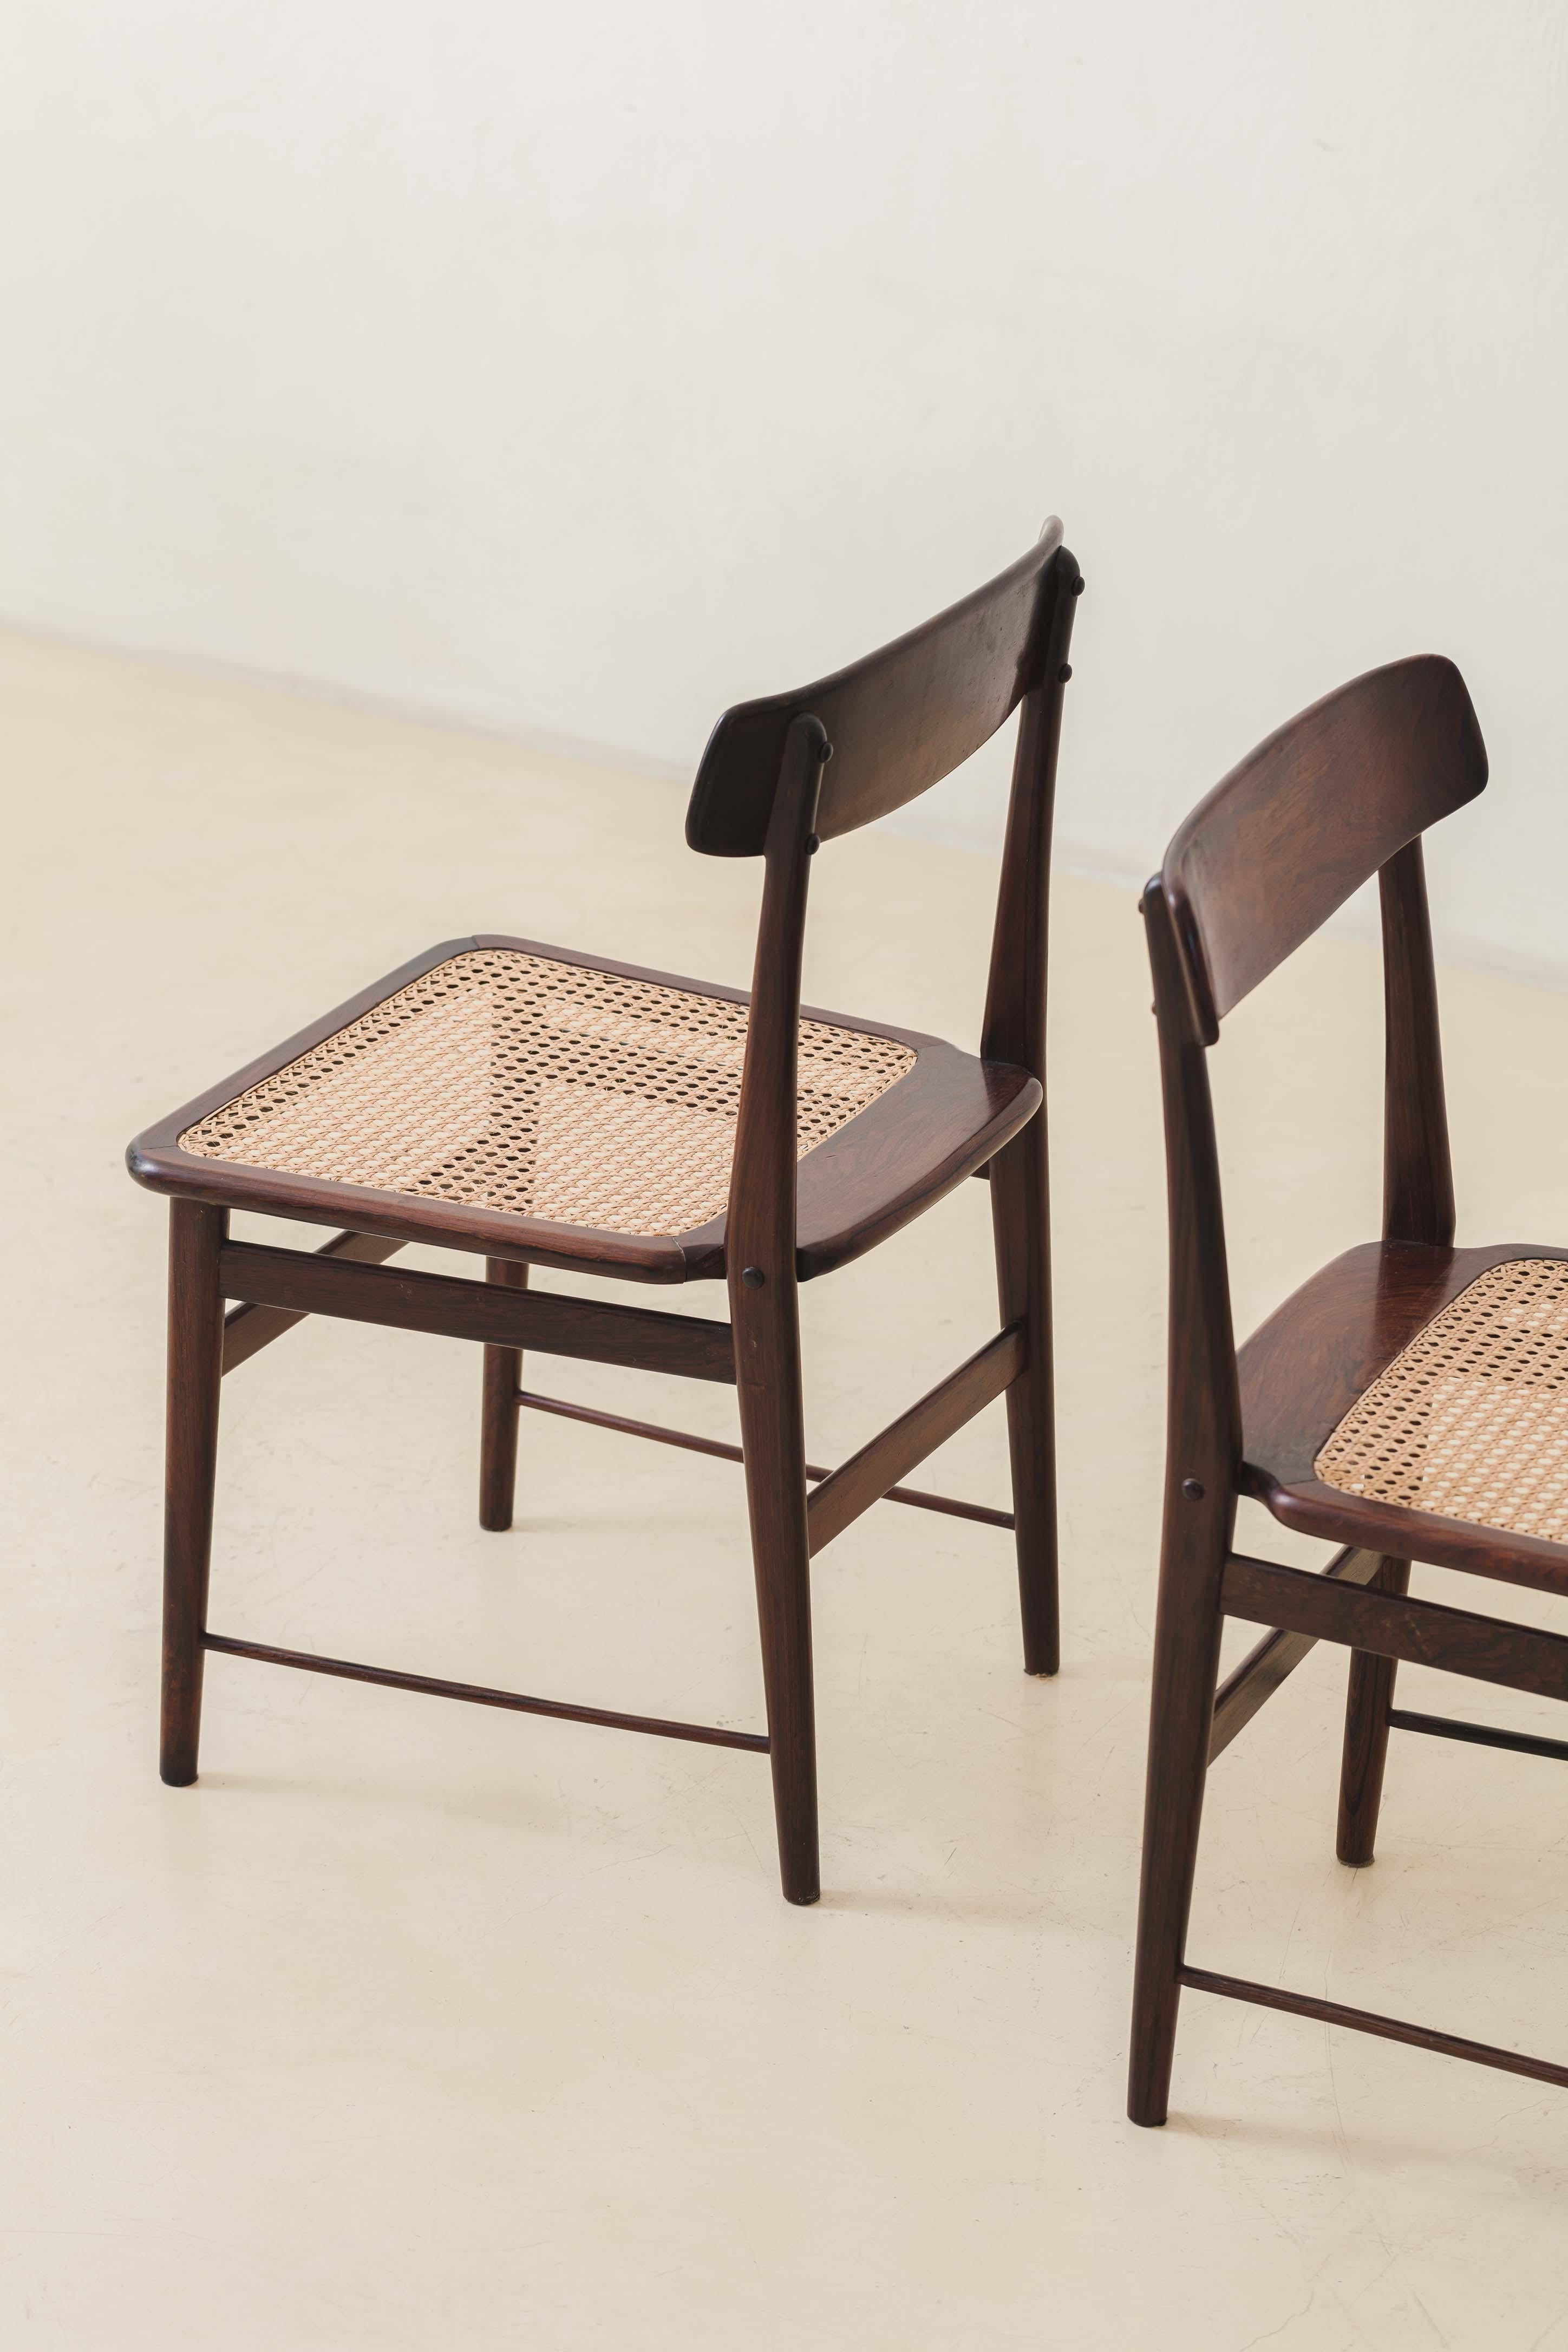 Set of 8 Rosewood ‘Lucio' Chairs, Sergio Rodrigues, 1956, Brazilian Midcentury For Sale 4